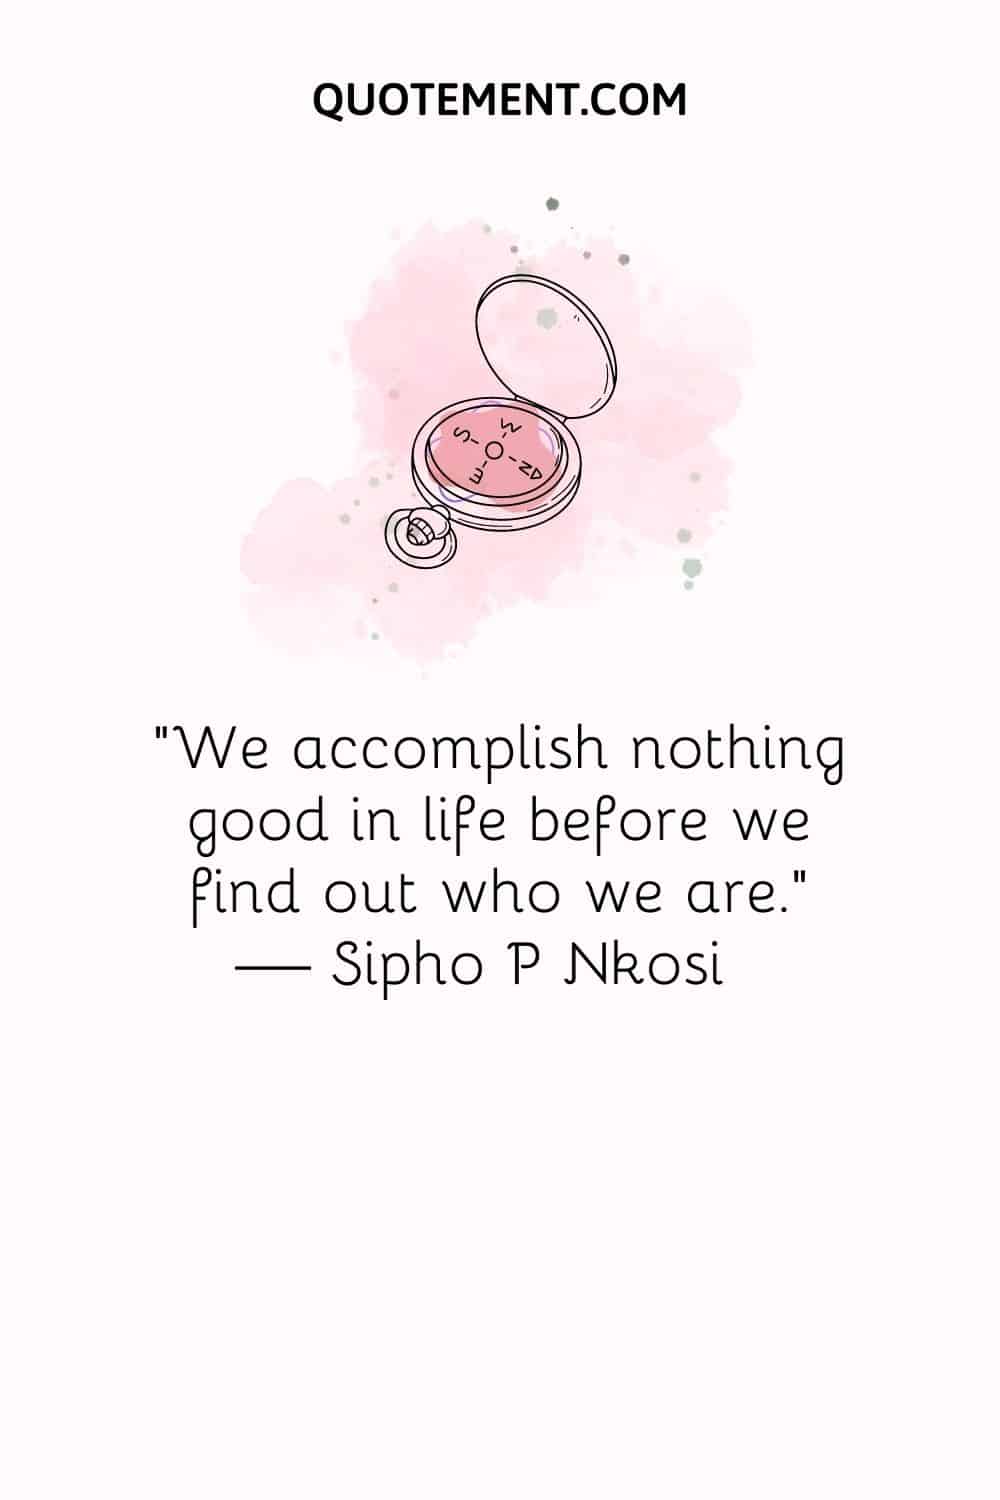 We accomplish nothing good in life before we find out who we are